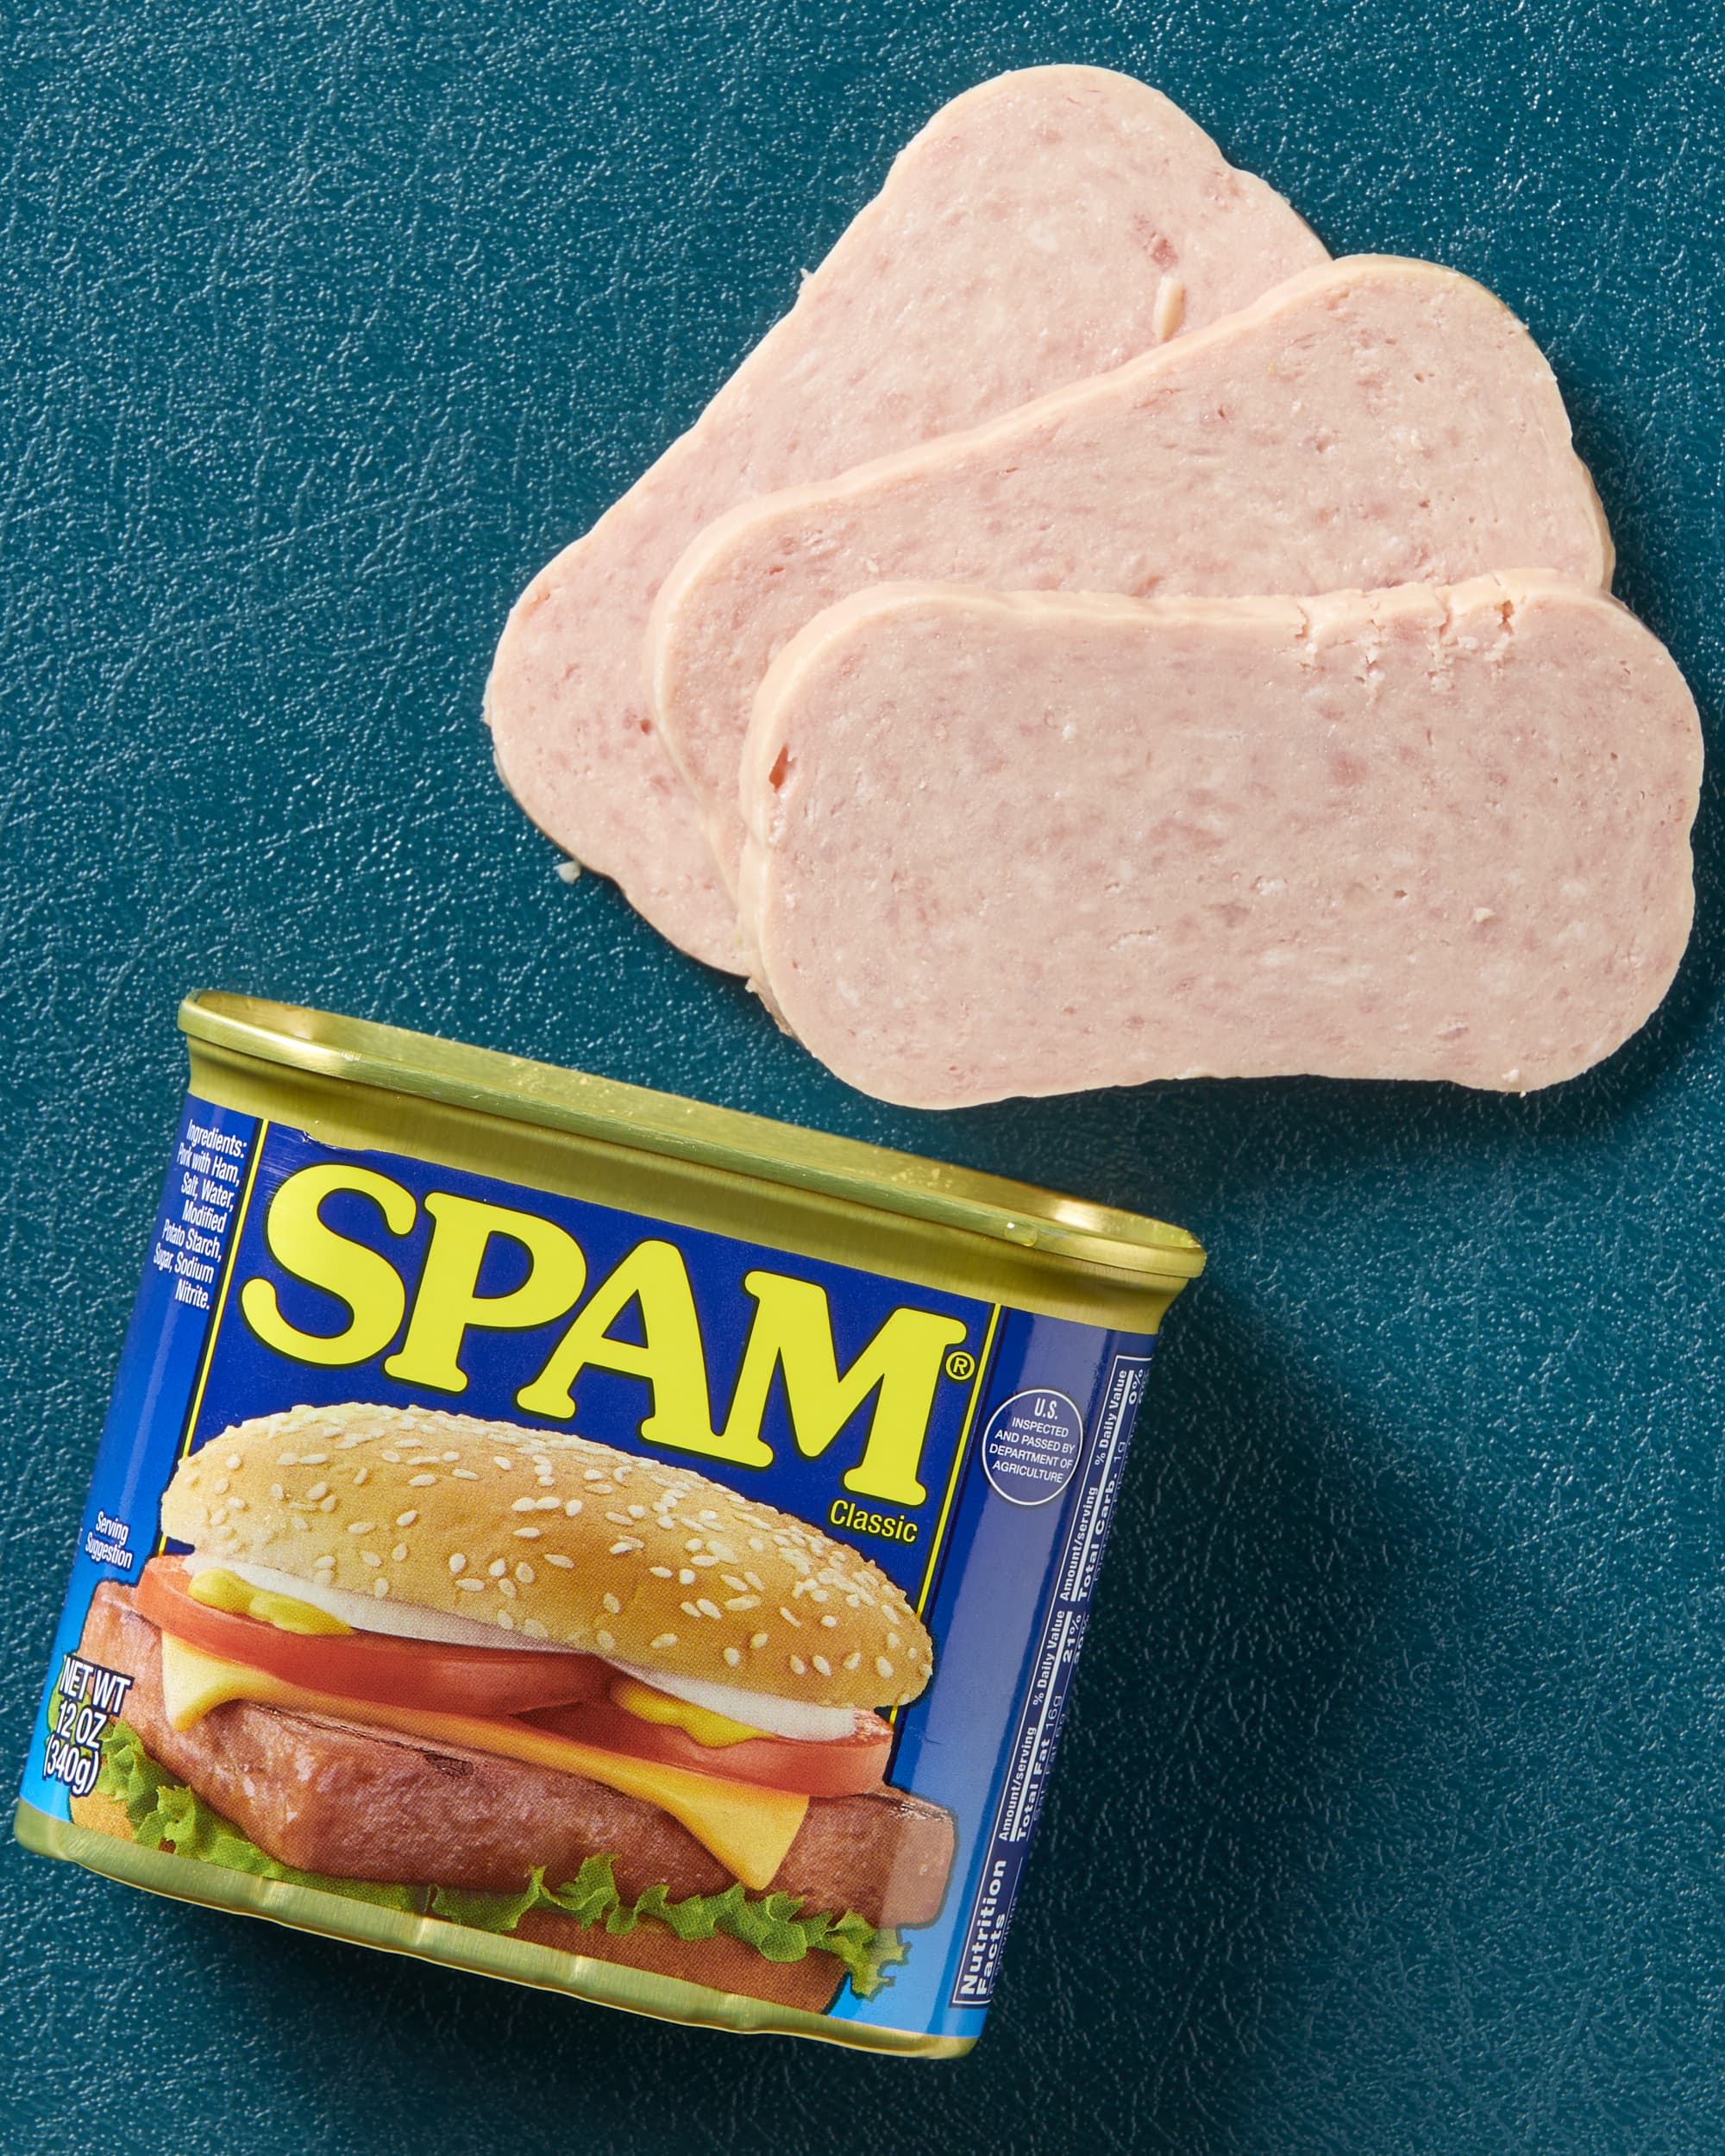 https://cdn.apartmenttherapy.info/image/upload/v1696622196/k/Photo/Series/2023-10-what-is-spam-made-of/what-is-spam-made-of-021.jpg